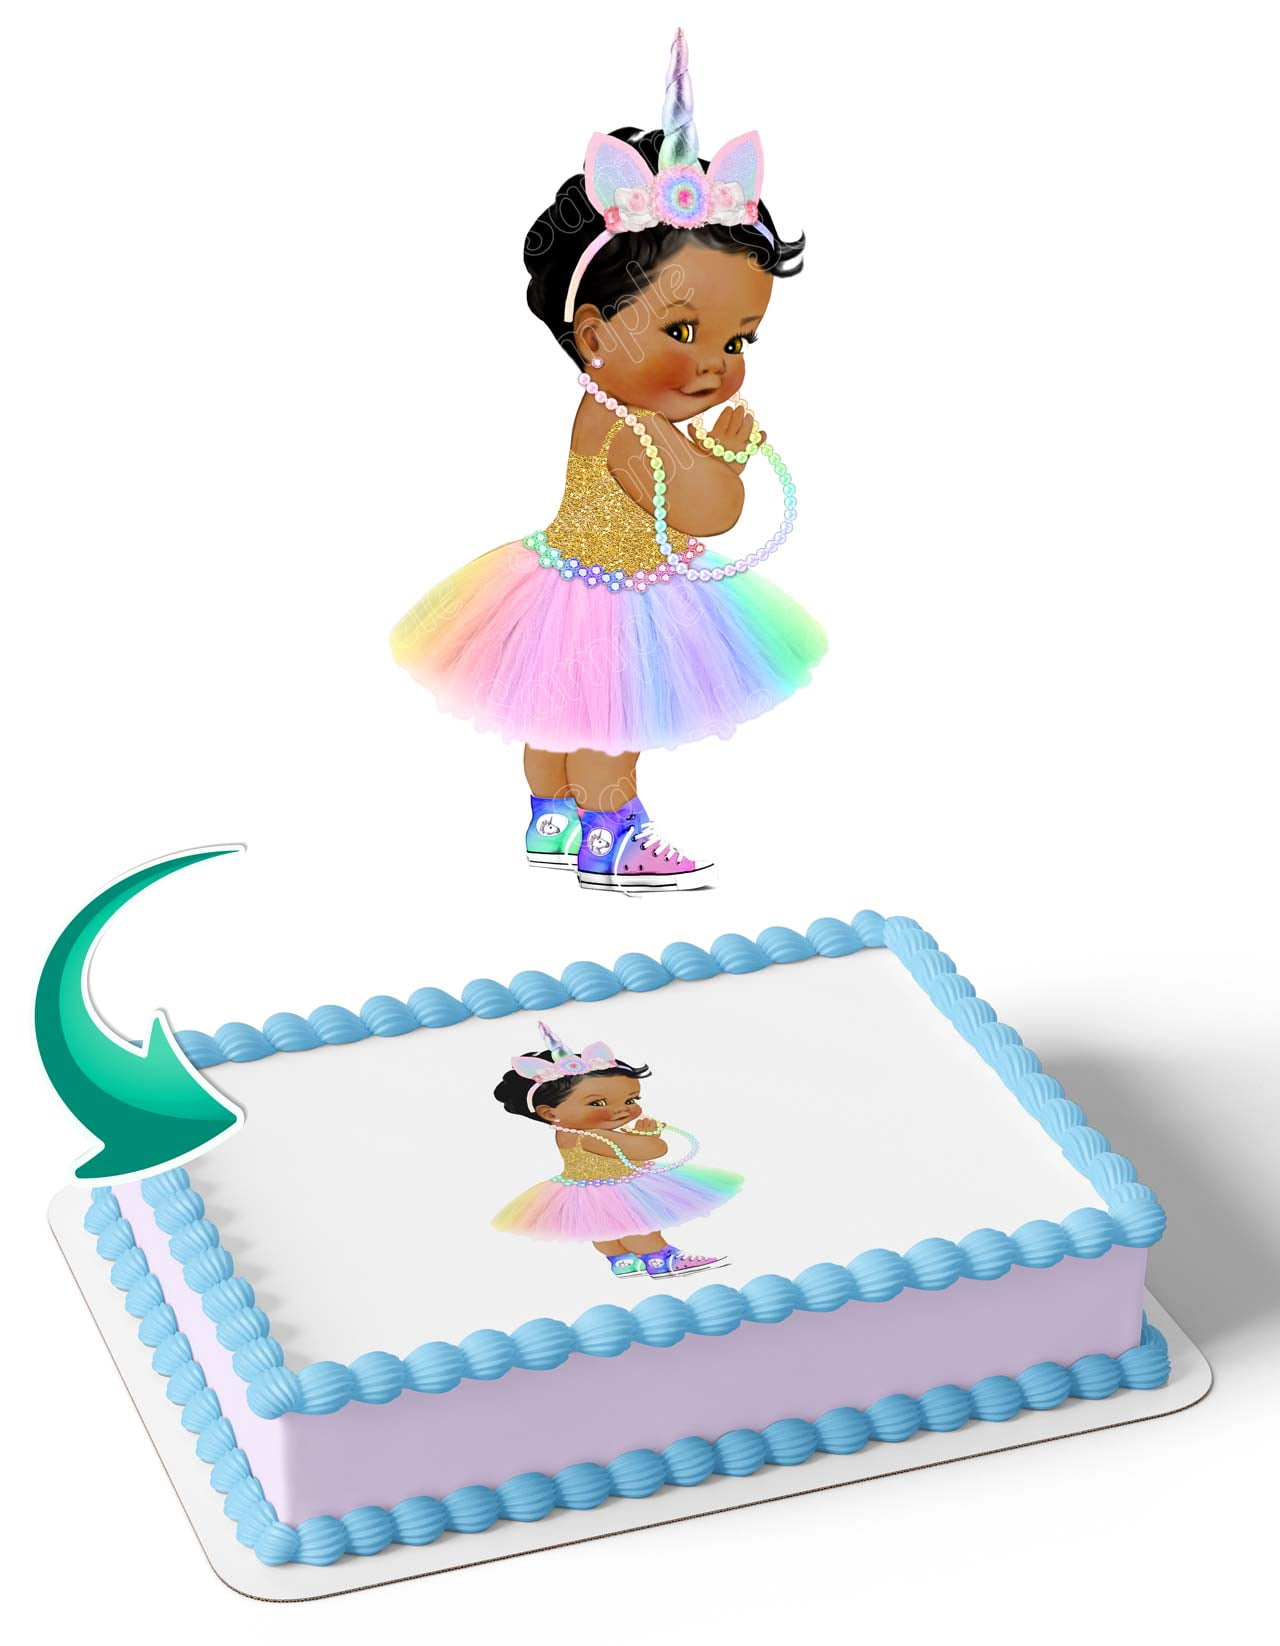 Drunk Doll Cake Topper | Funny Decoration Kit for Celebrating a  Bachelorette Party or any Birthday 21 and Up (8 Piece Set)(Not  Edible)(African